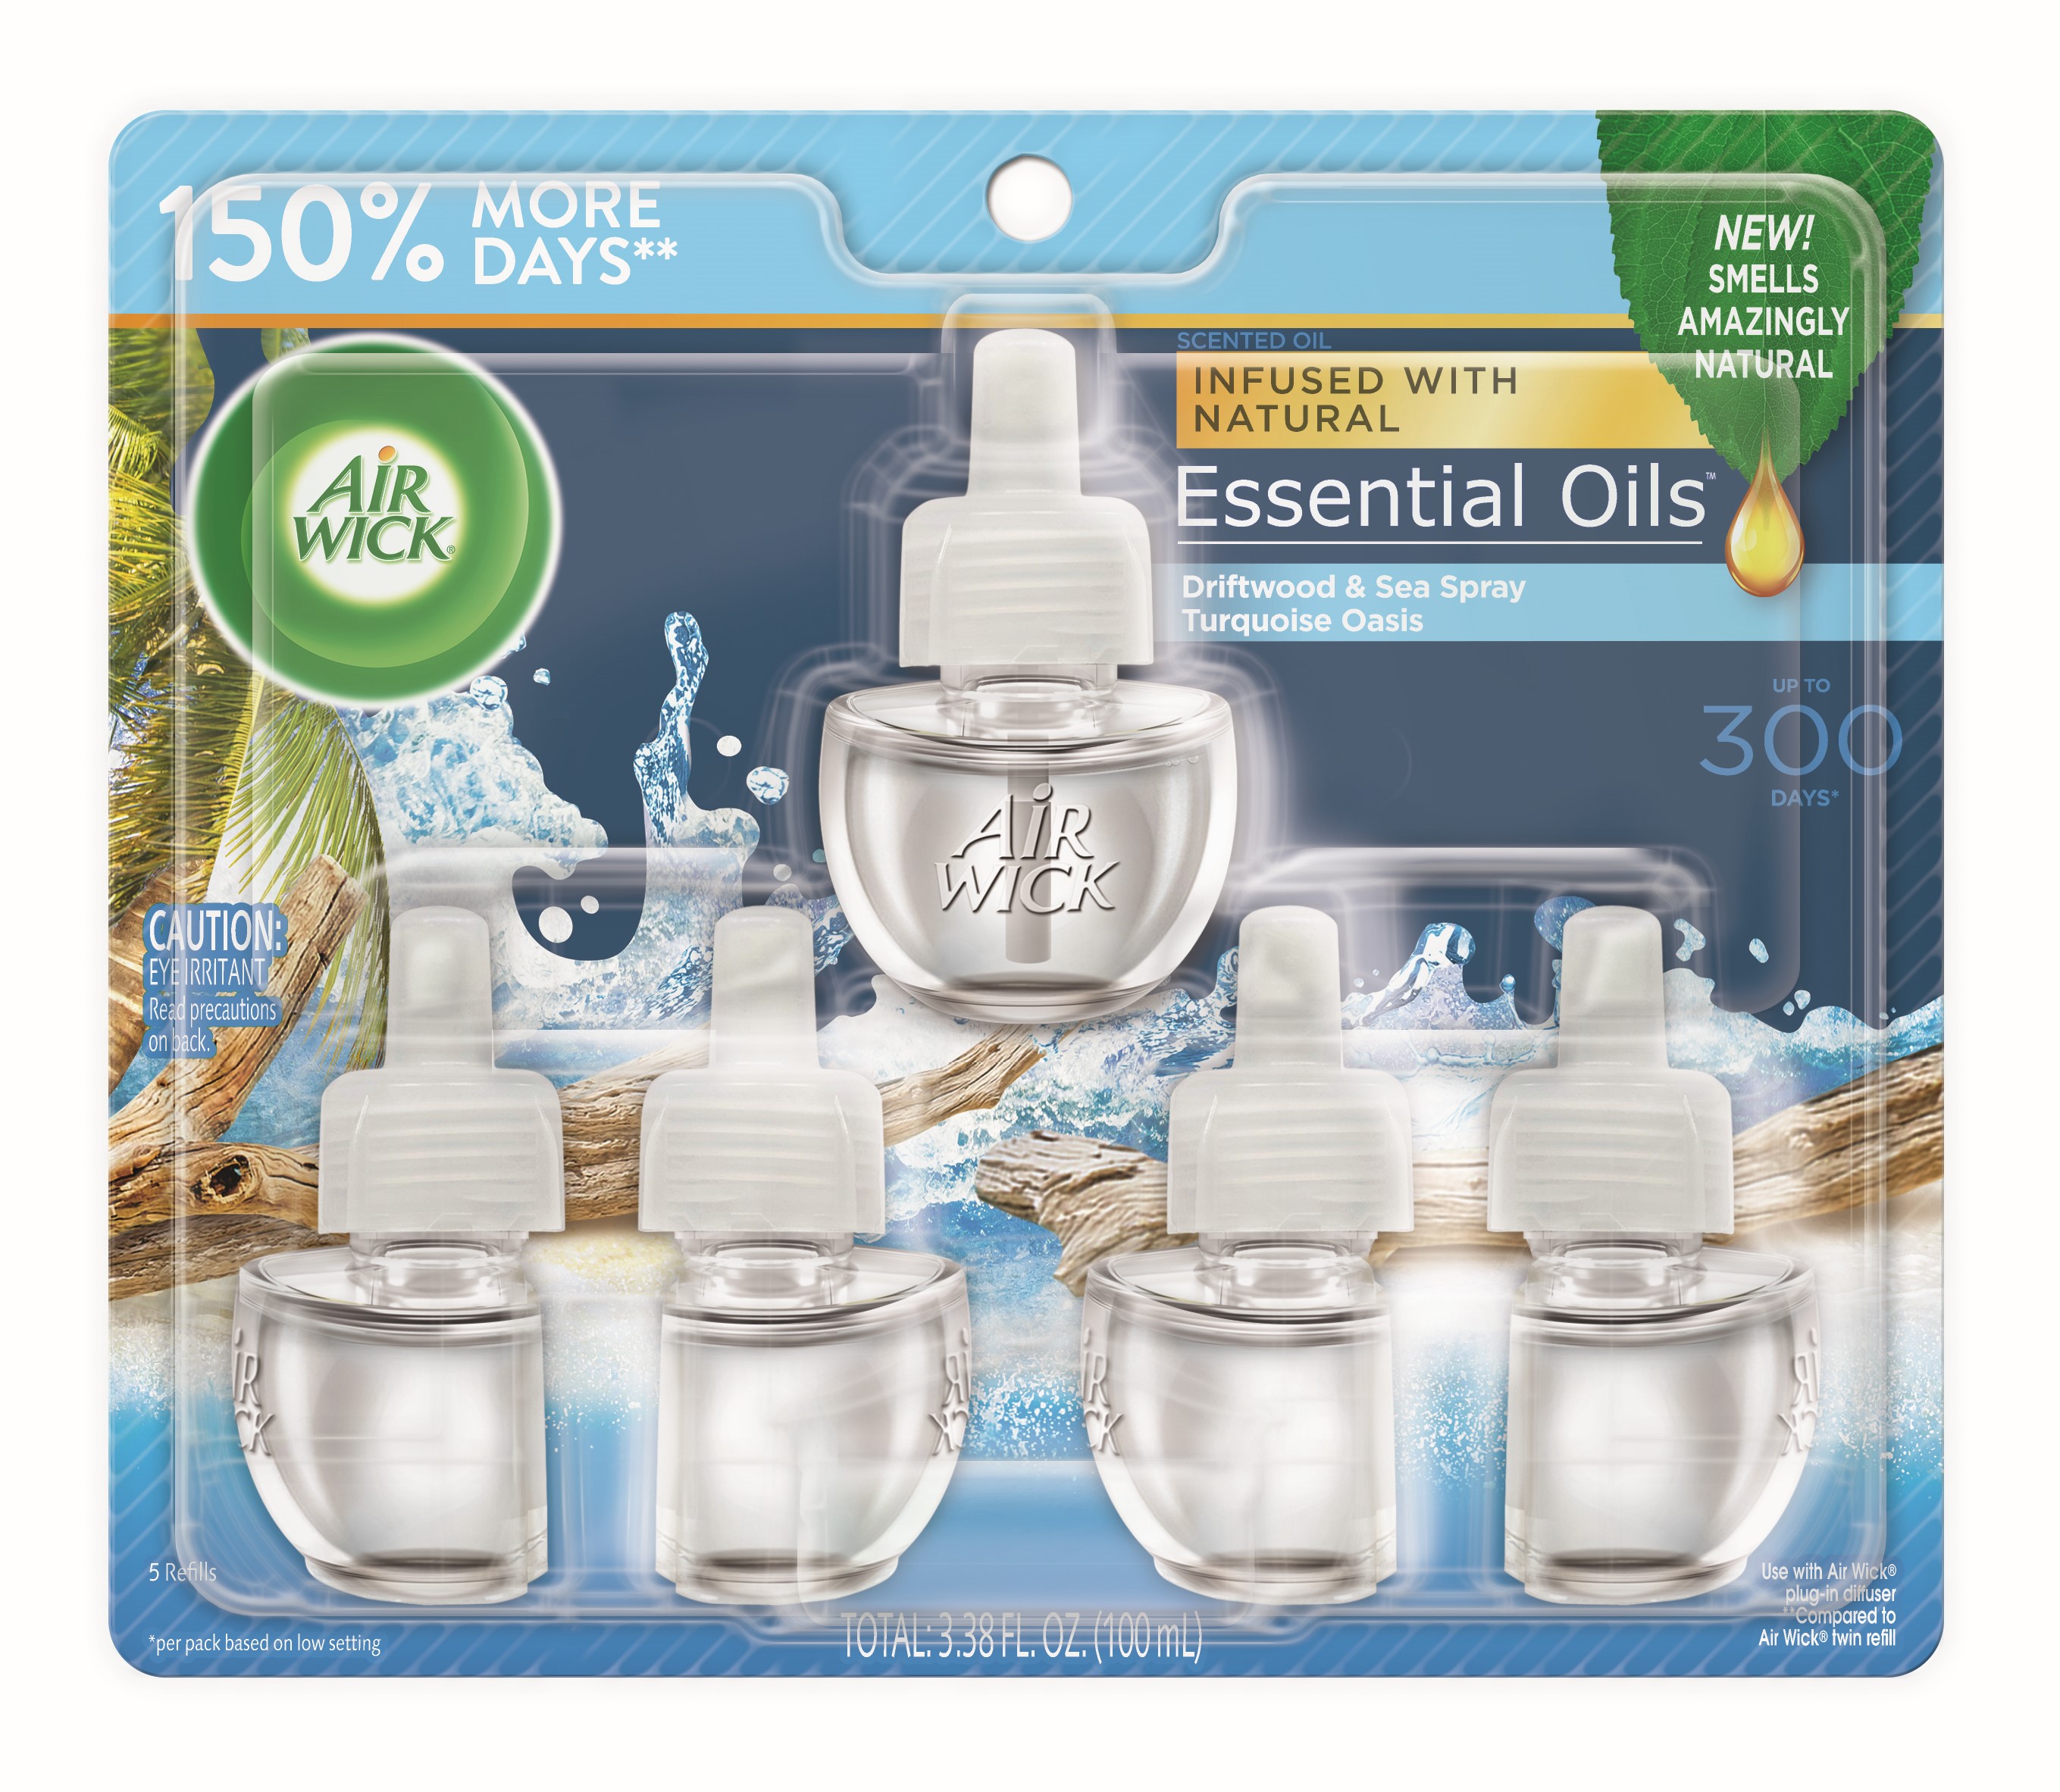 AIR WICK Scented Oil  Driftwood  Sea Spray 